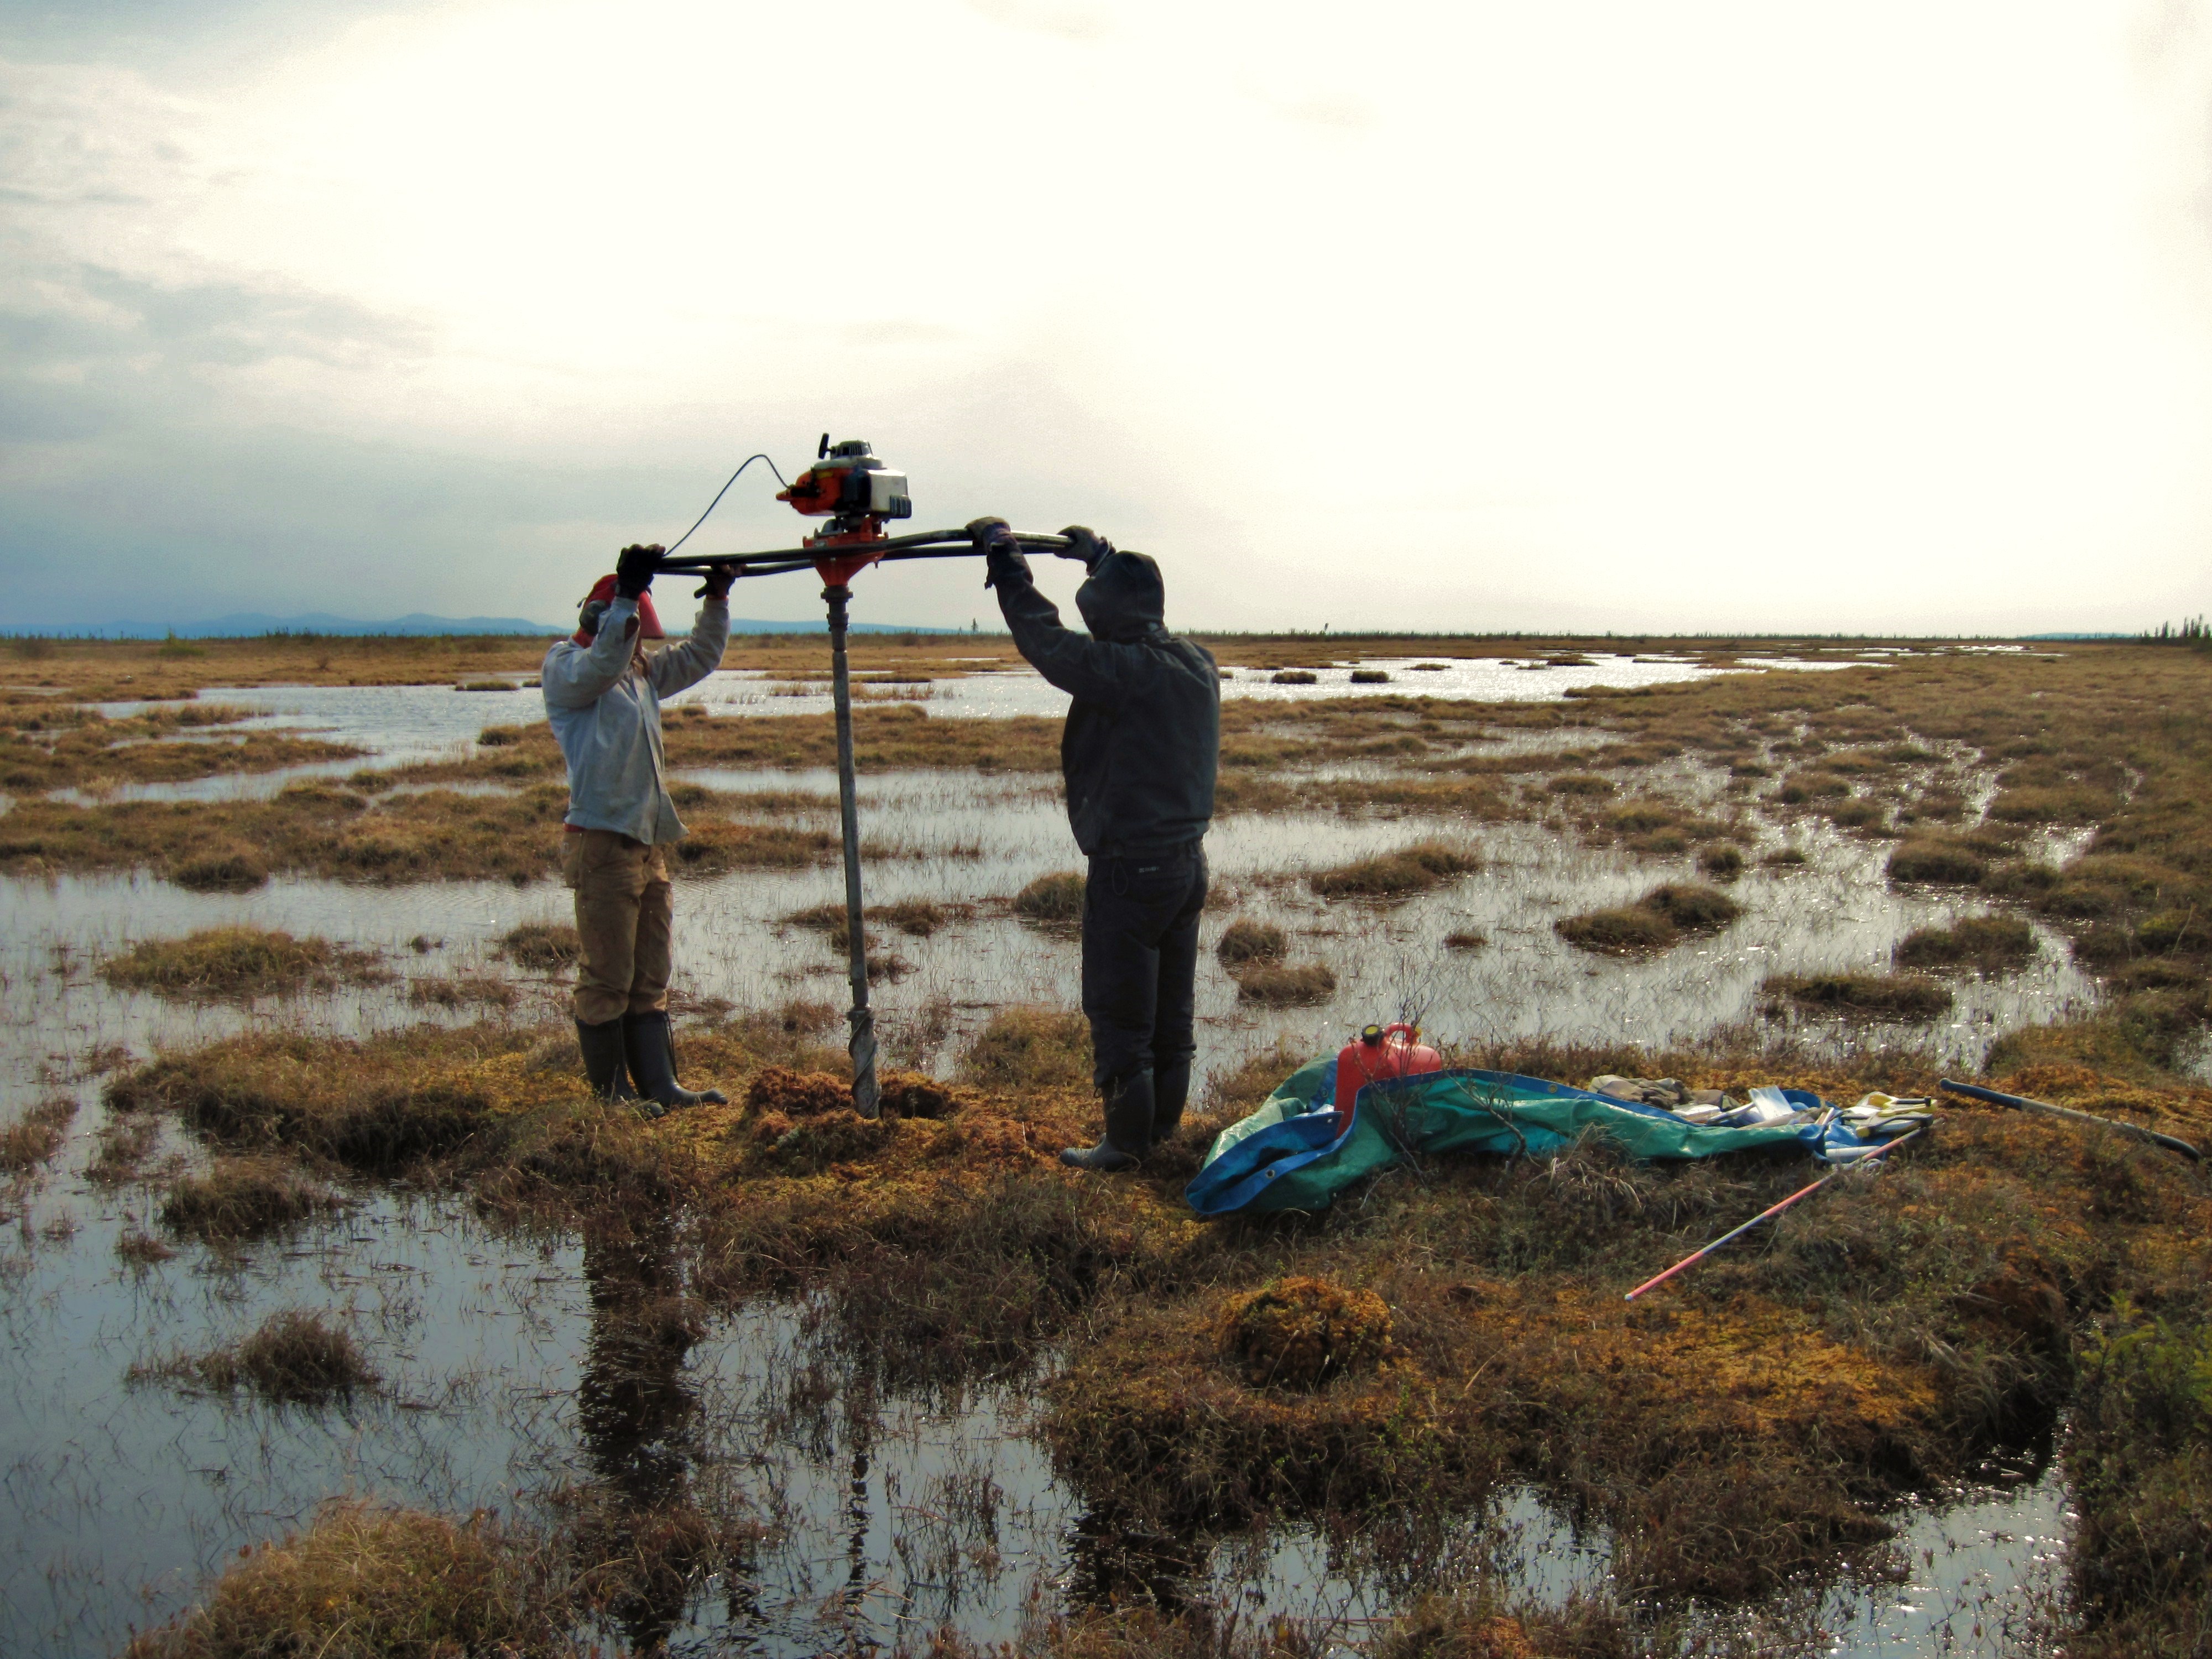 Two people taking permafrost samples for research purposes